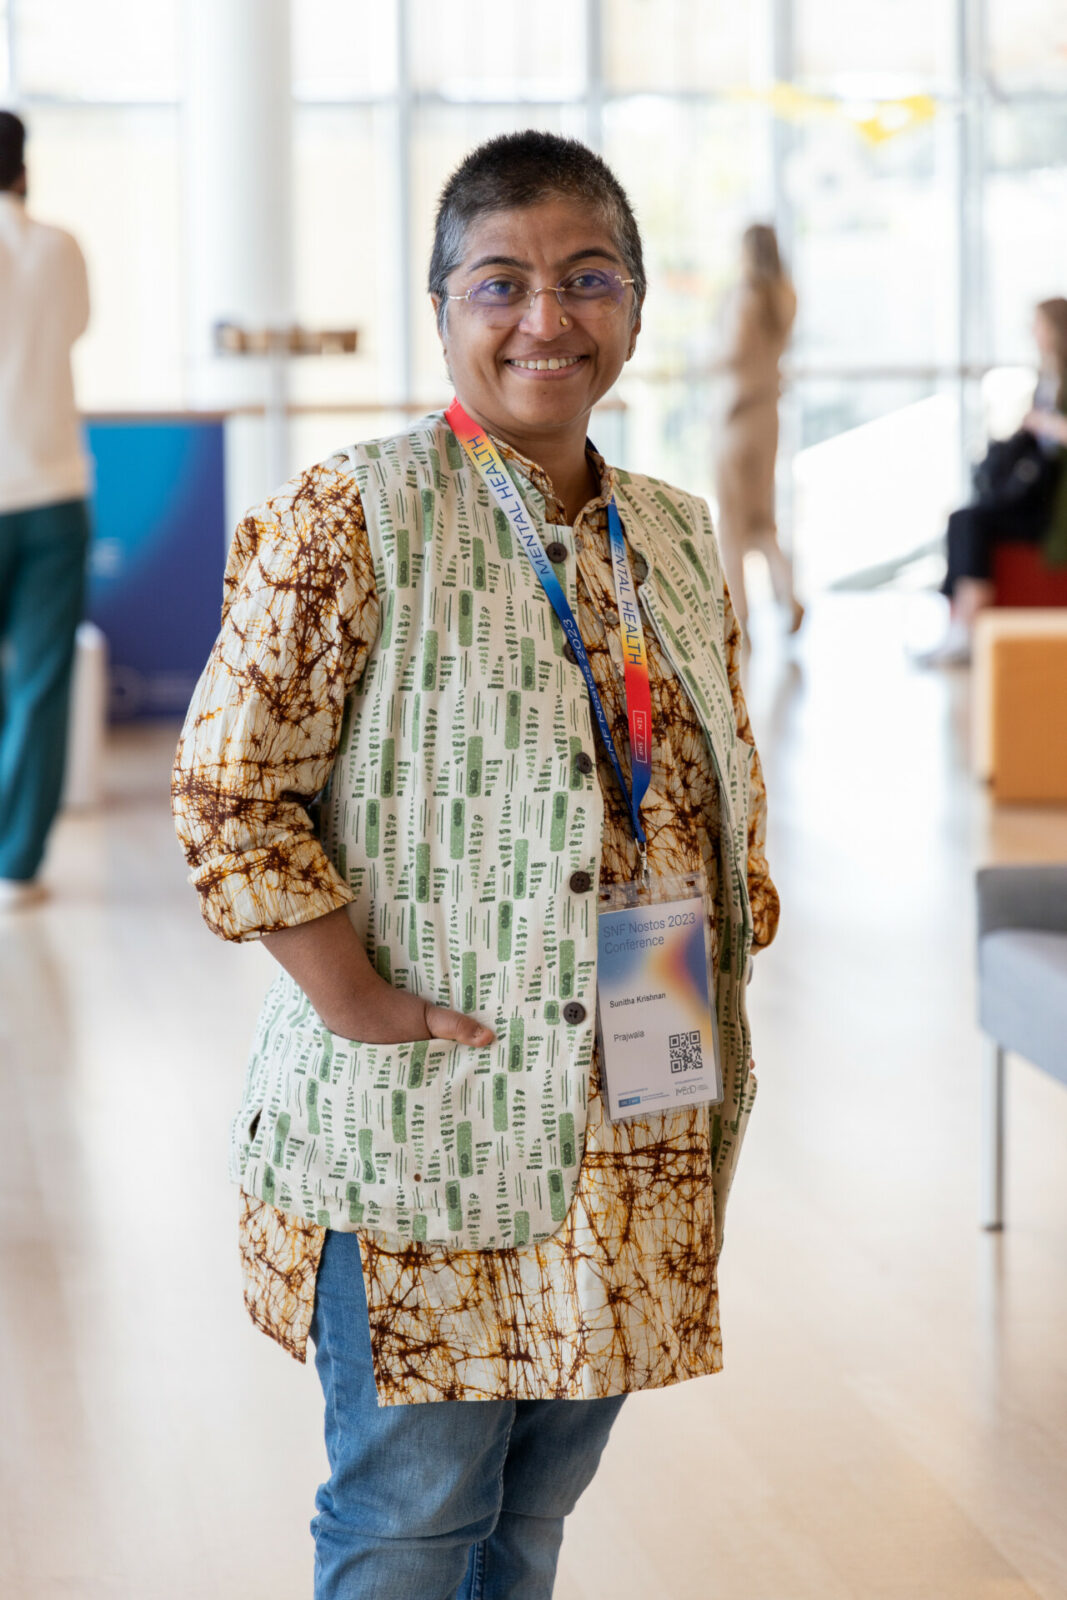 Sunitha Krishnan stands in a bright hall. She smiles at the camera, has her colored conference badge around her neck and her hands in the pockets of her green vest.